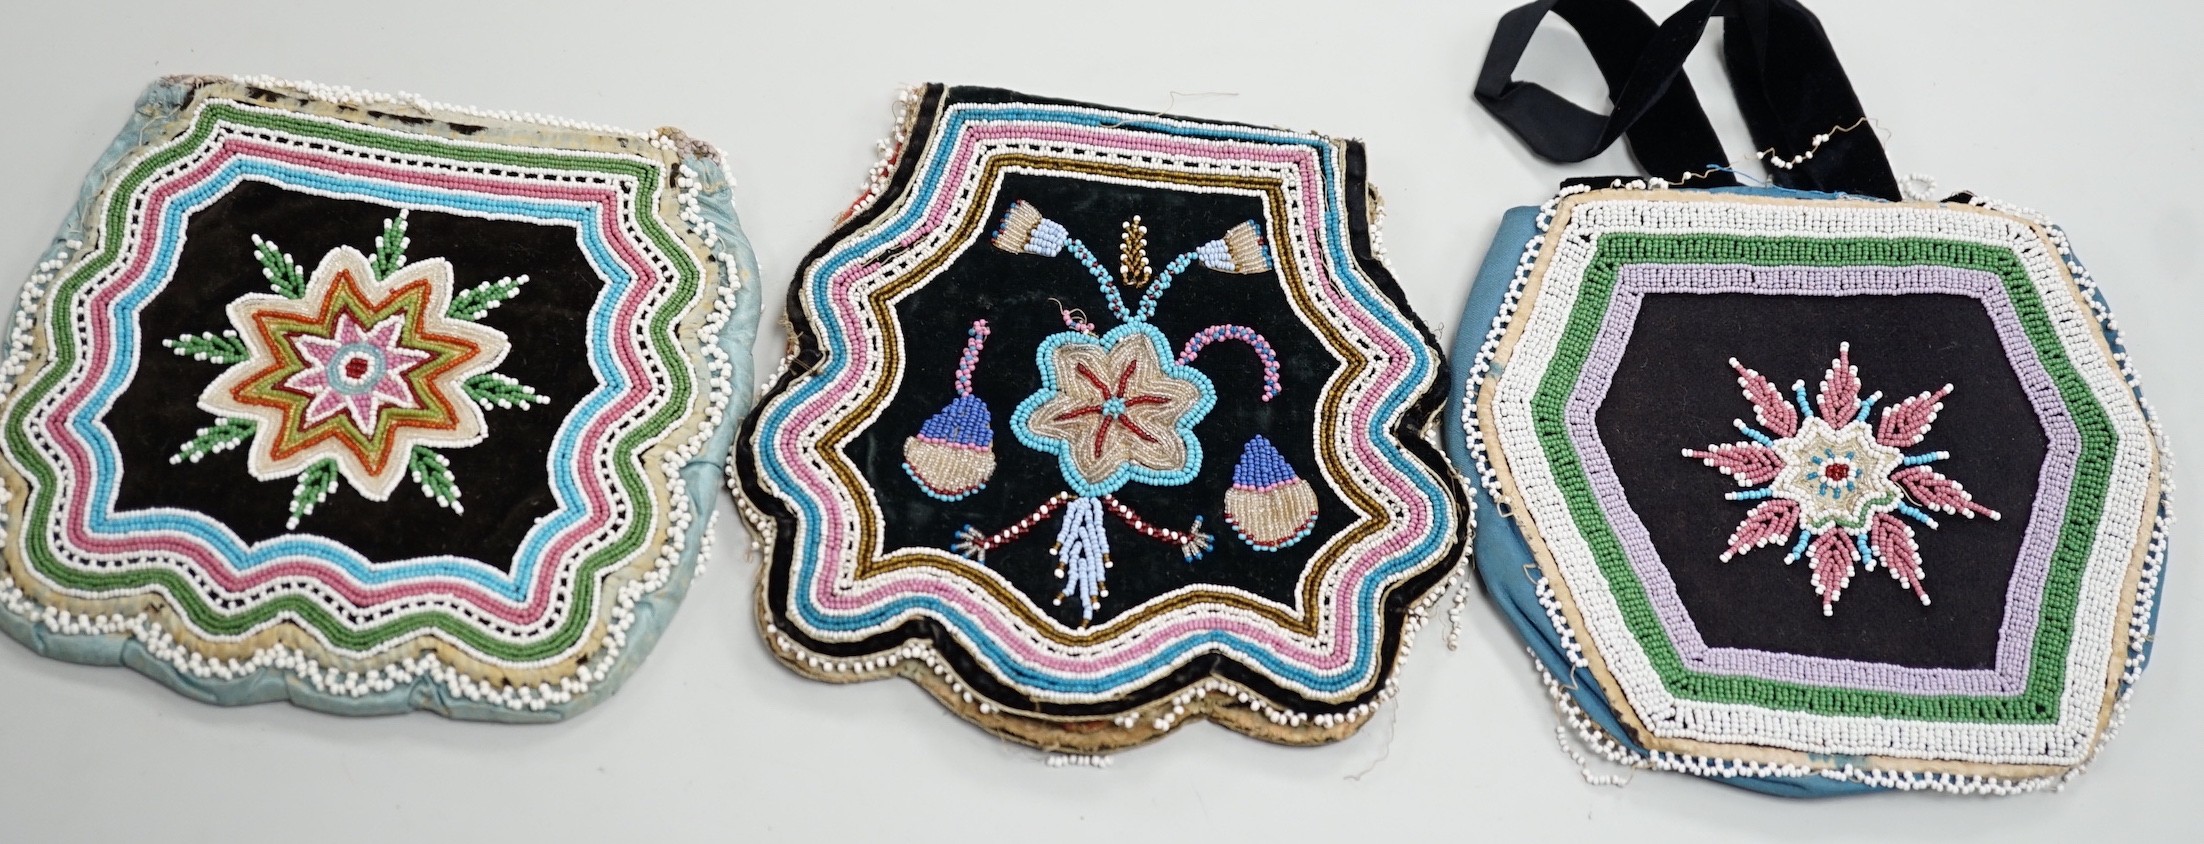 Three mid to late 19th century, Haudenosaunee (Iroquois) Grand River Reserve, native North American/Canadian fine glass beadwork and silk bags